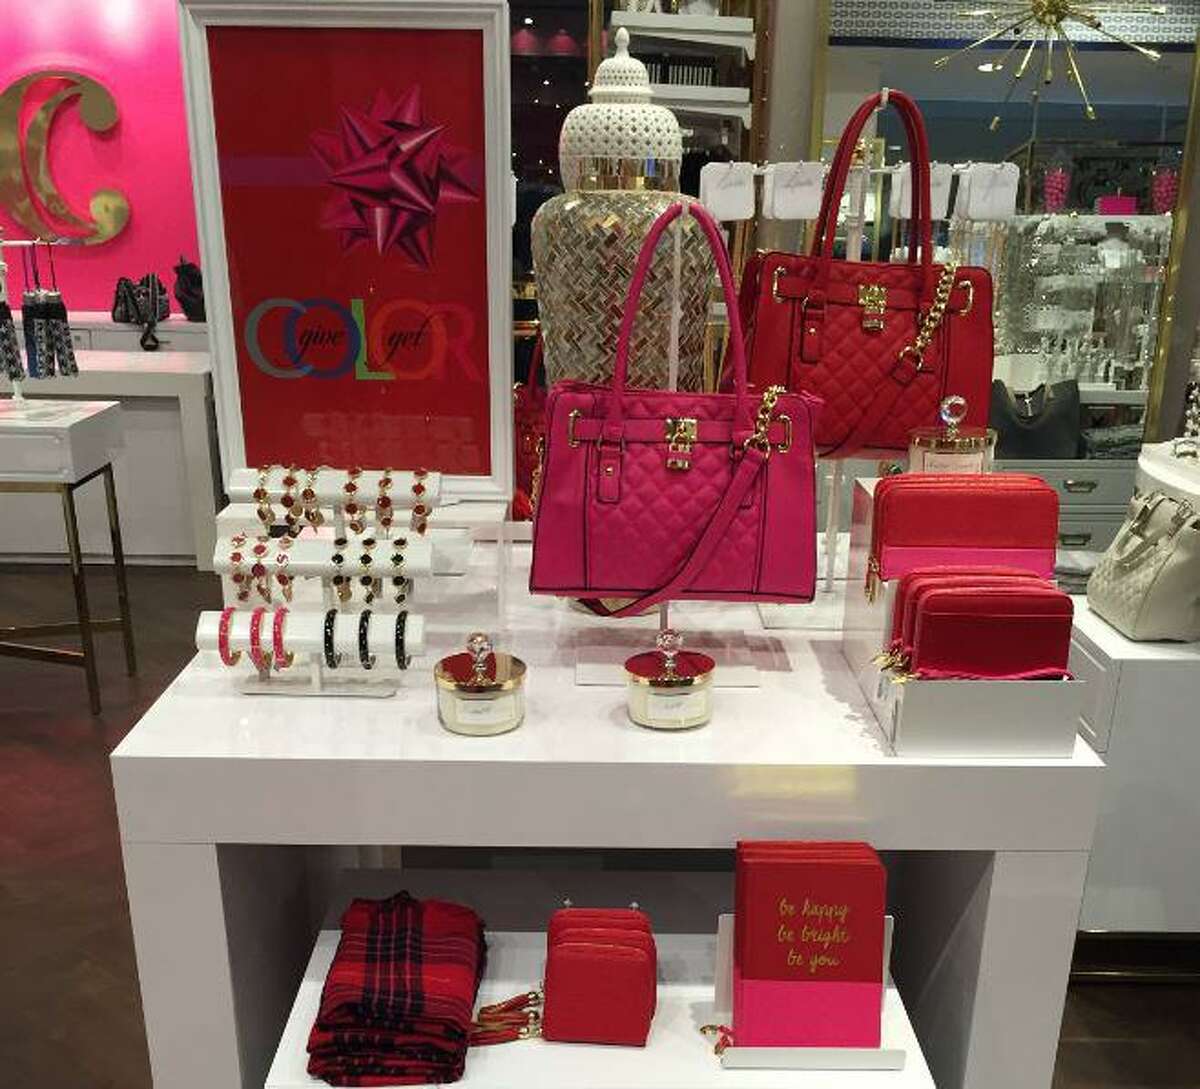 The first Charming Charlie in the Philippines is scheduled to open Saturday, Dec. 19, 2015. The Houston-based women's jewelry and accessories retailer has opened as many as 55 U.S. stores each year, and expanded to Dubai in 2015.